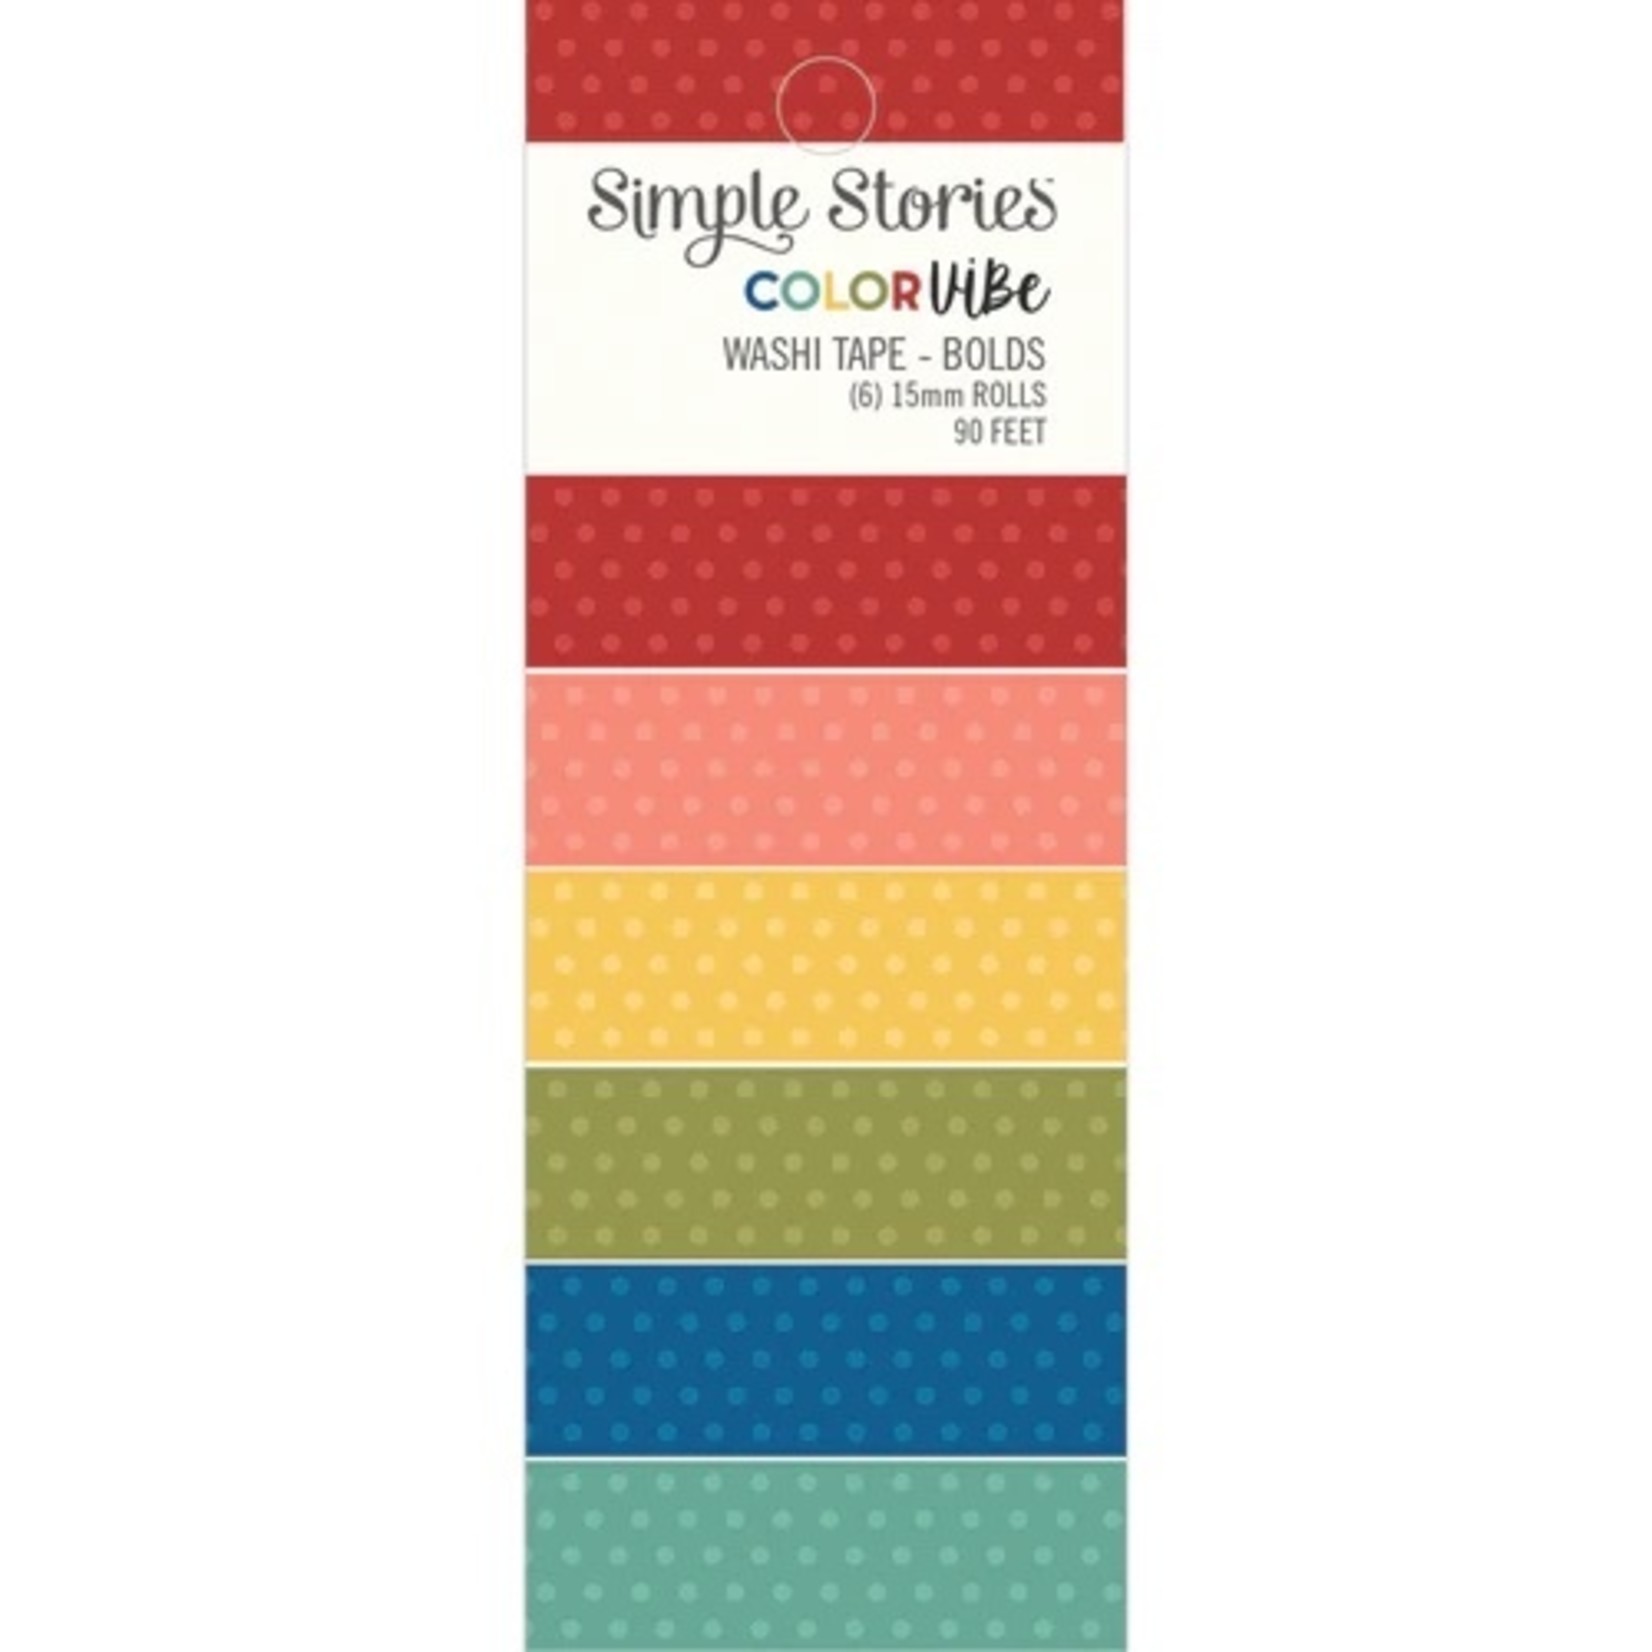 SIMPLE STORIES COLOR VIBE WASHI TAPE 15MMX9O' 6/PK BOLDS